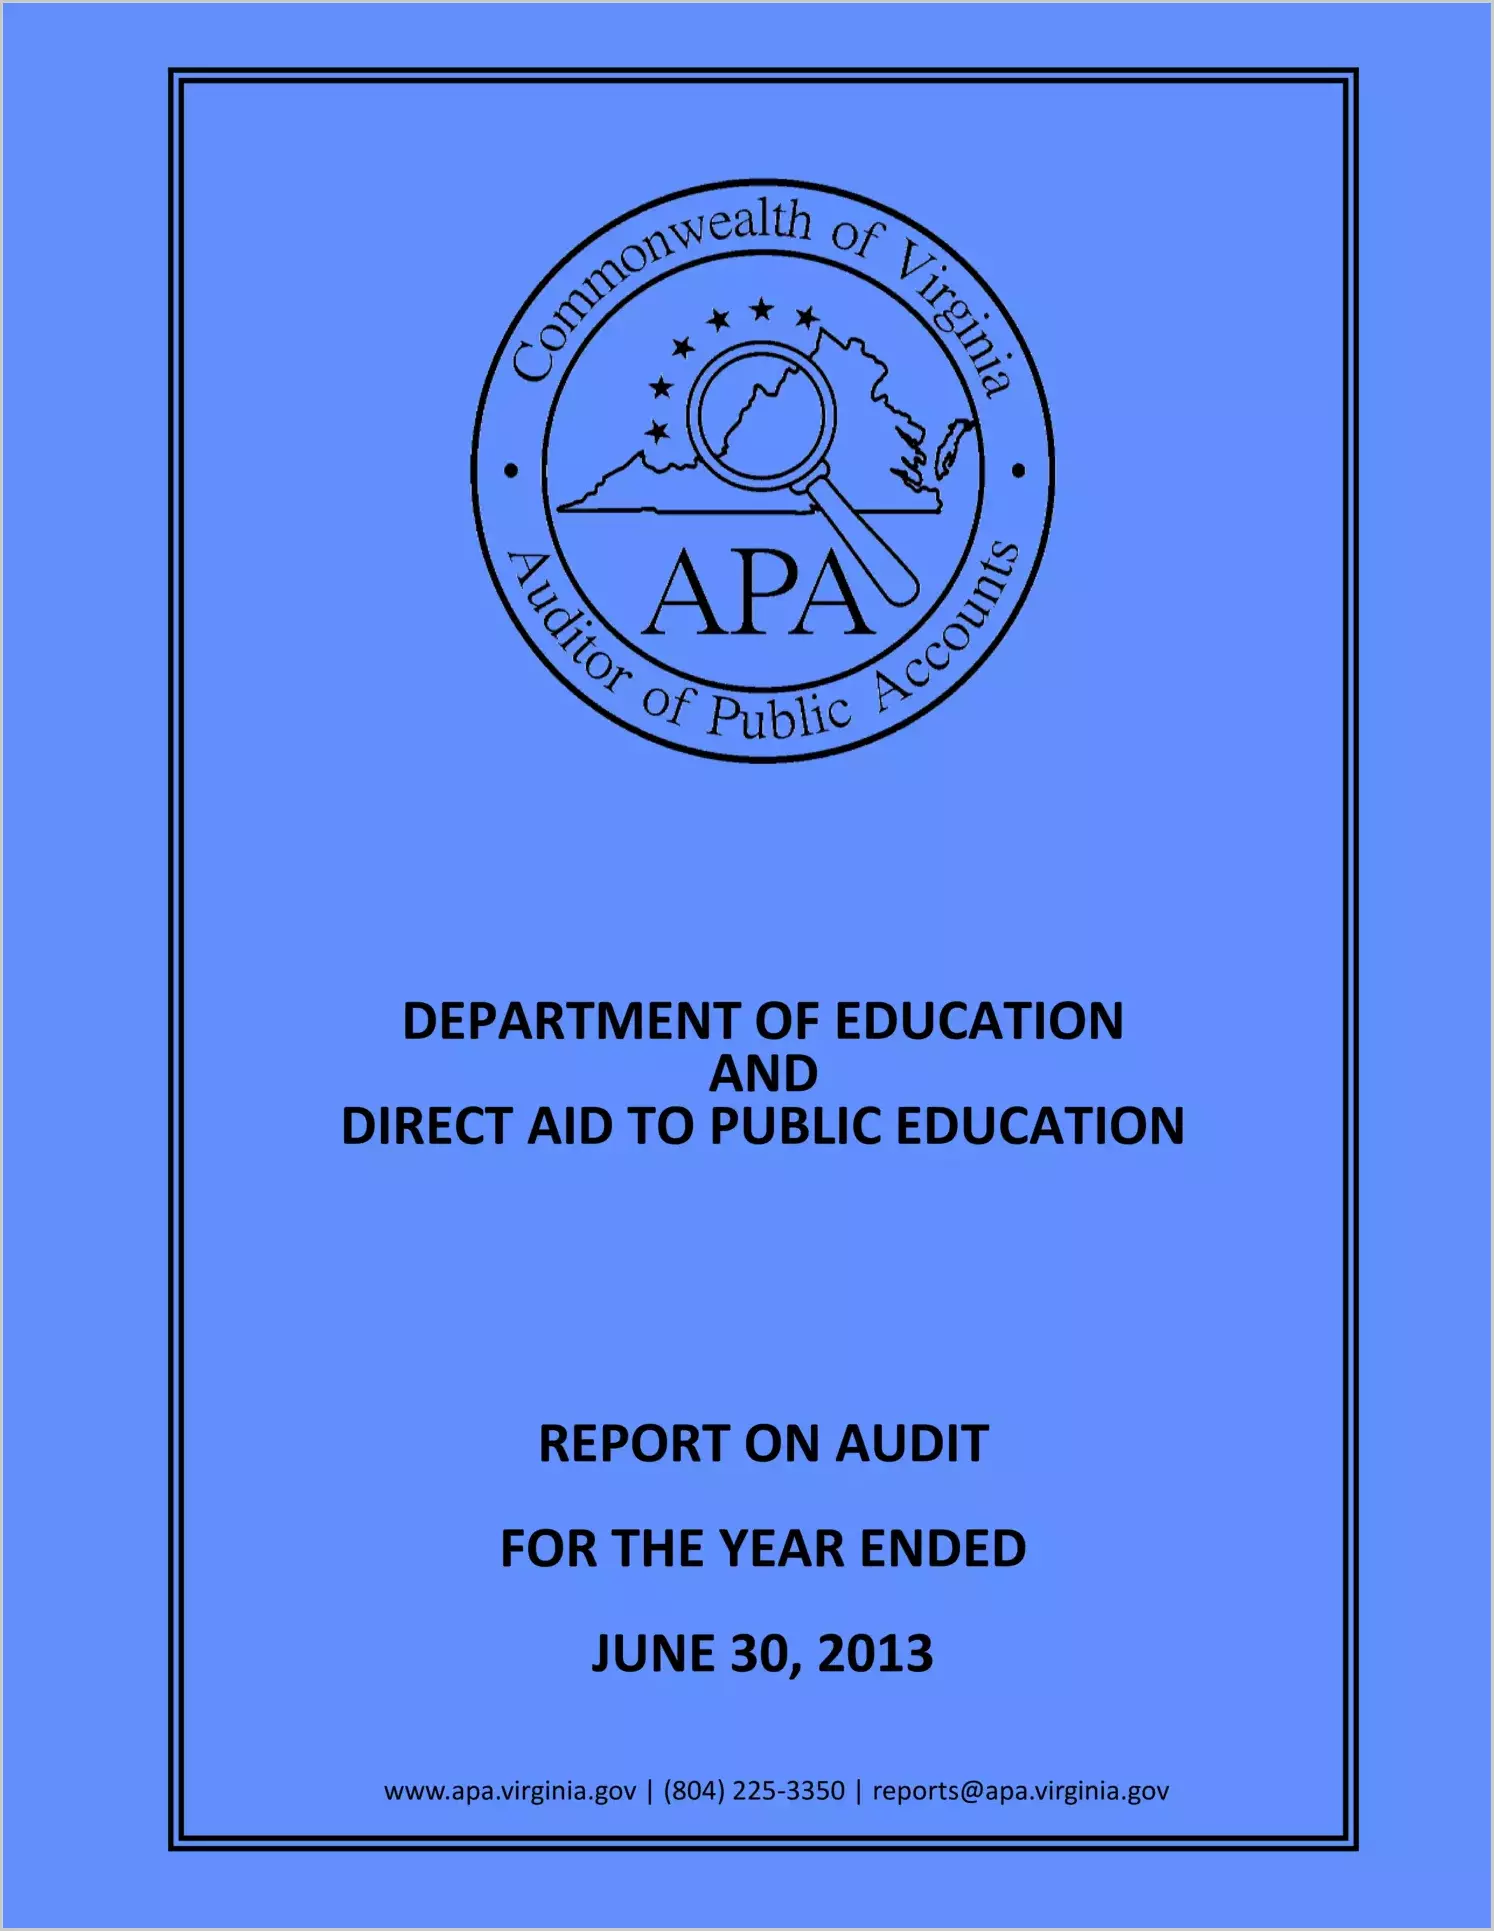 Department of Education Including Direct Aid to Public Education for the year ended June 30, 2013